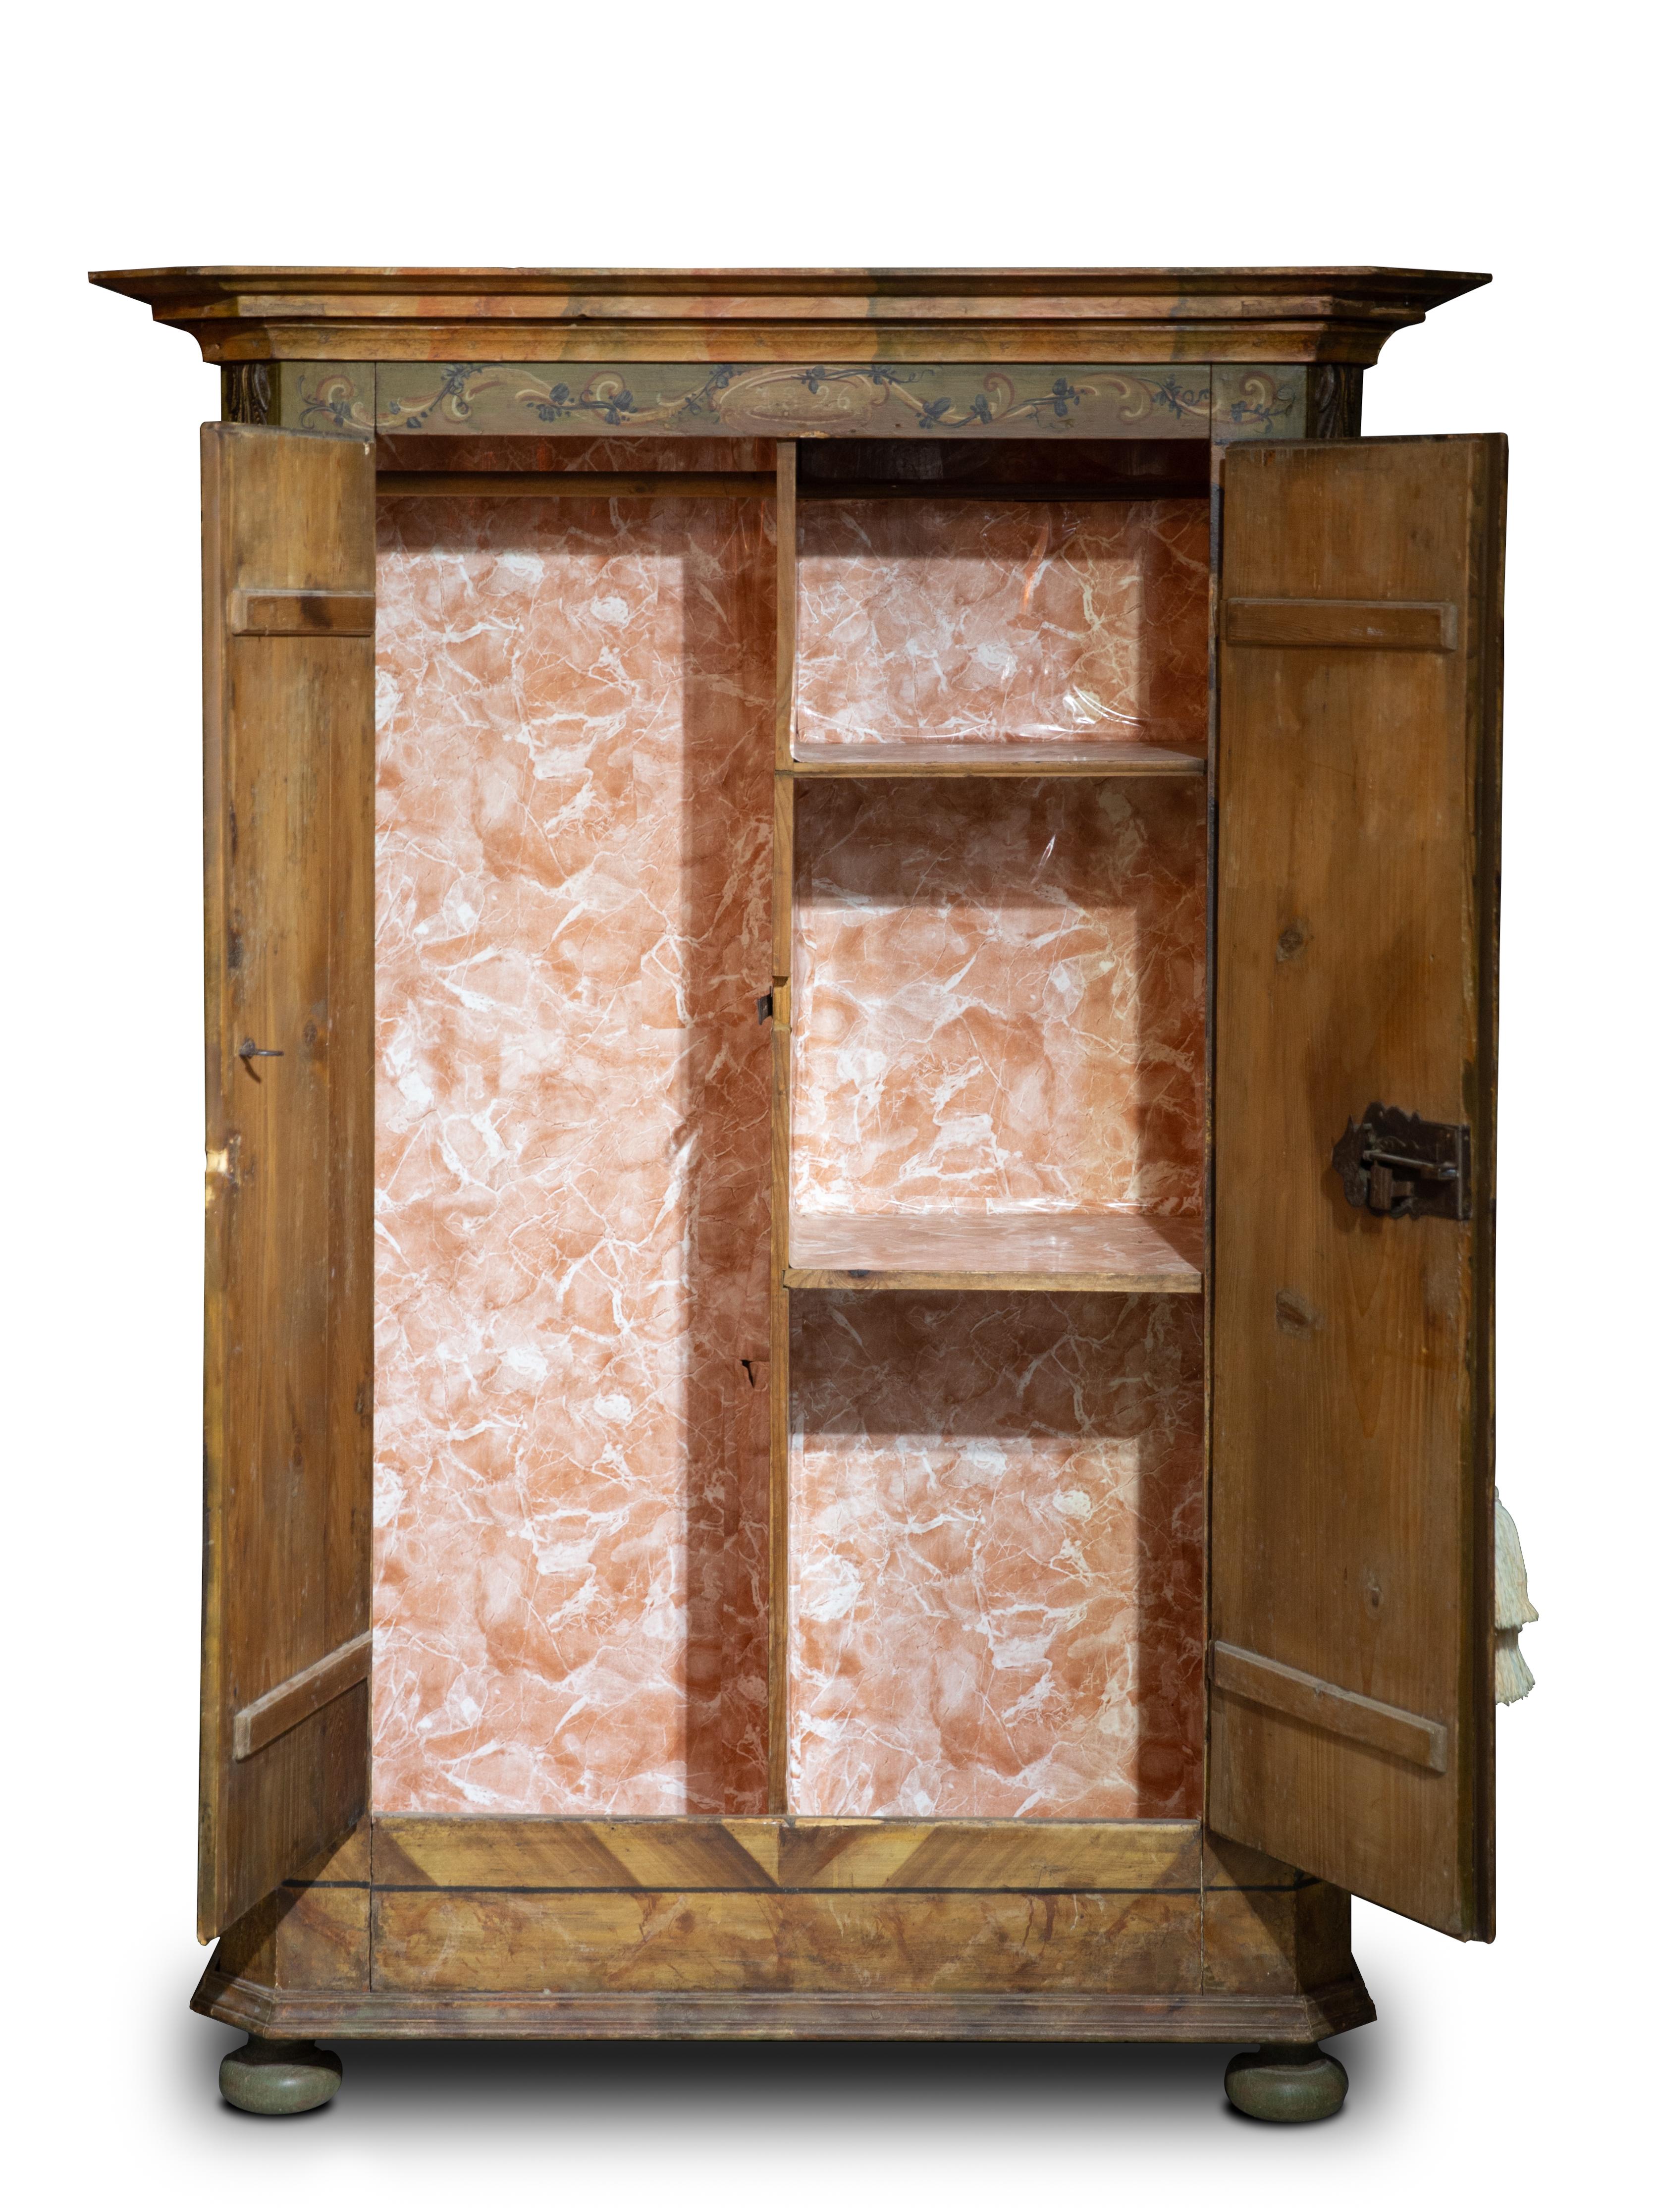 Offered is a hand painted Kas/Wardrobe/armoir/cupboard dated 1826. The piece is decorated with cartouches of historic churches and other significant buildings surrounded by foliate designs. The piece comes from the apartment of a well-known actress.